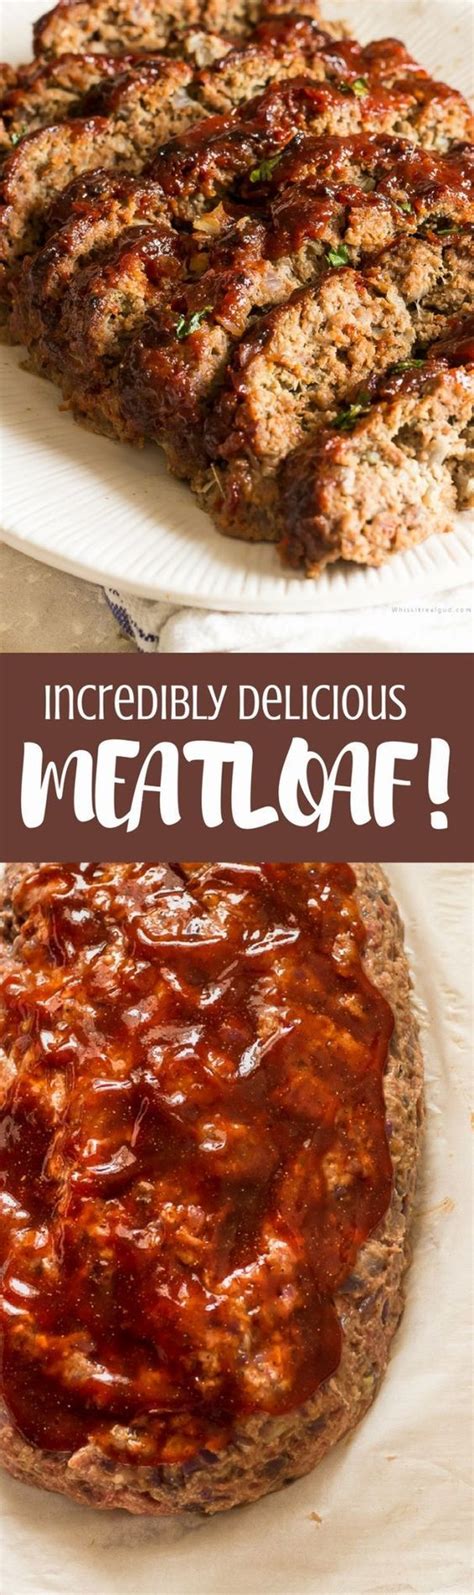 Meatloaf is easy, tasty and cheap. The Best Meatloaf | Recipe | Good meatloaf recipe, Food ...